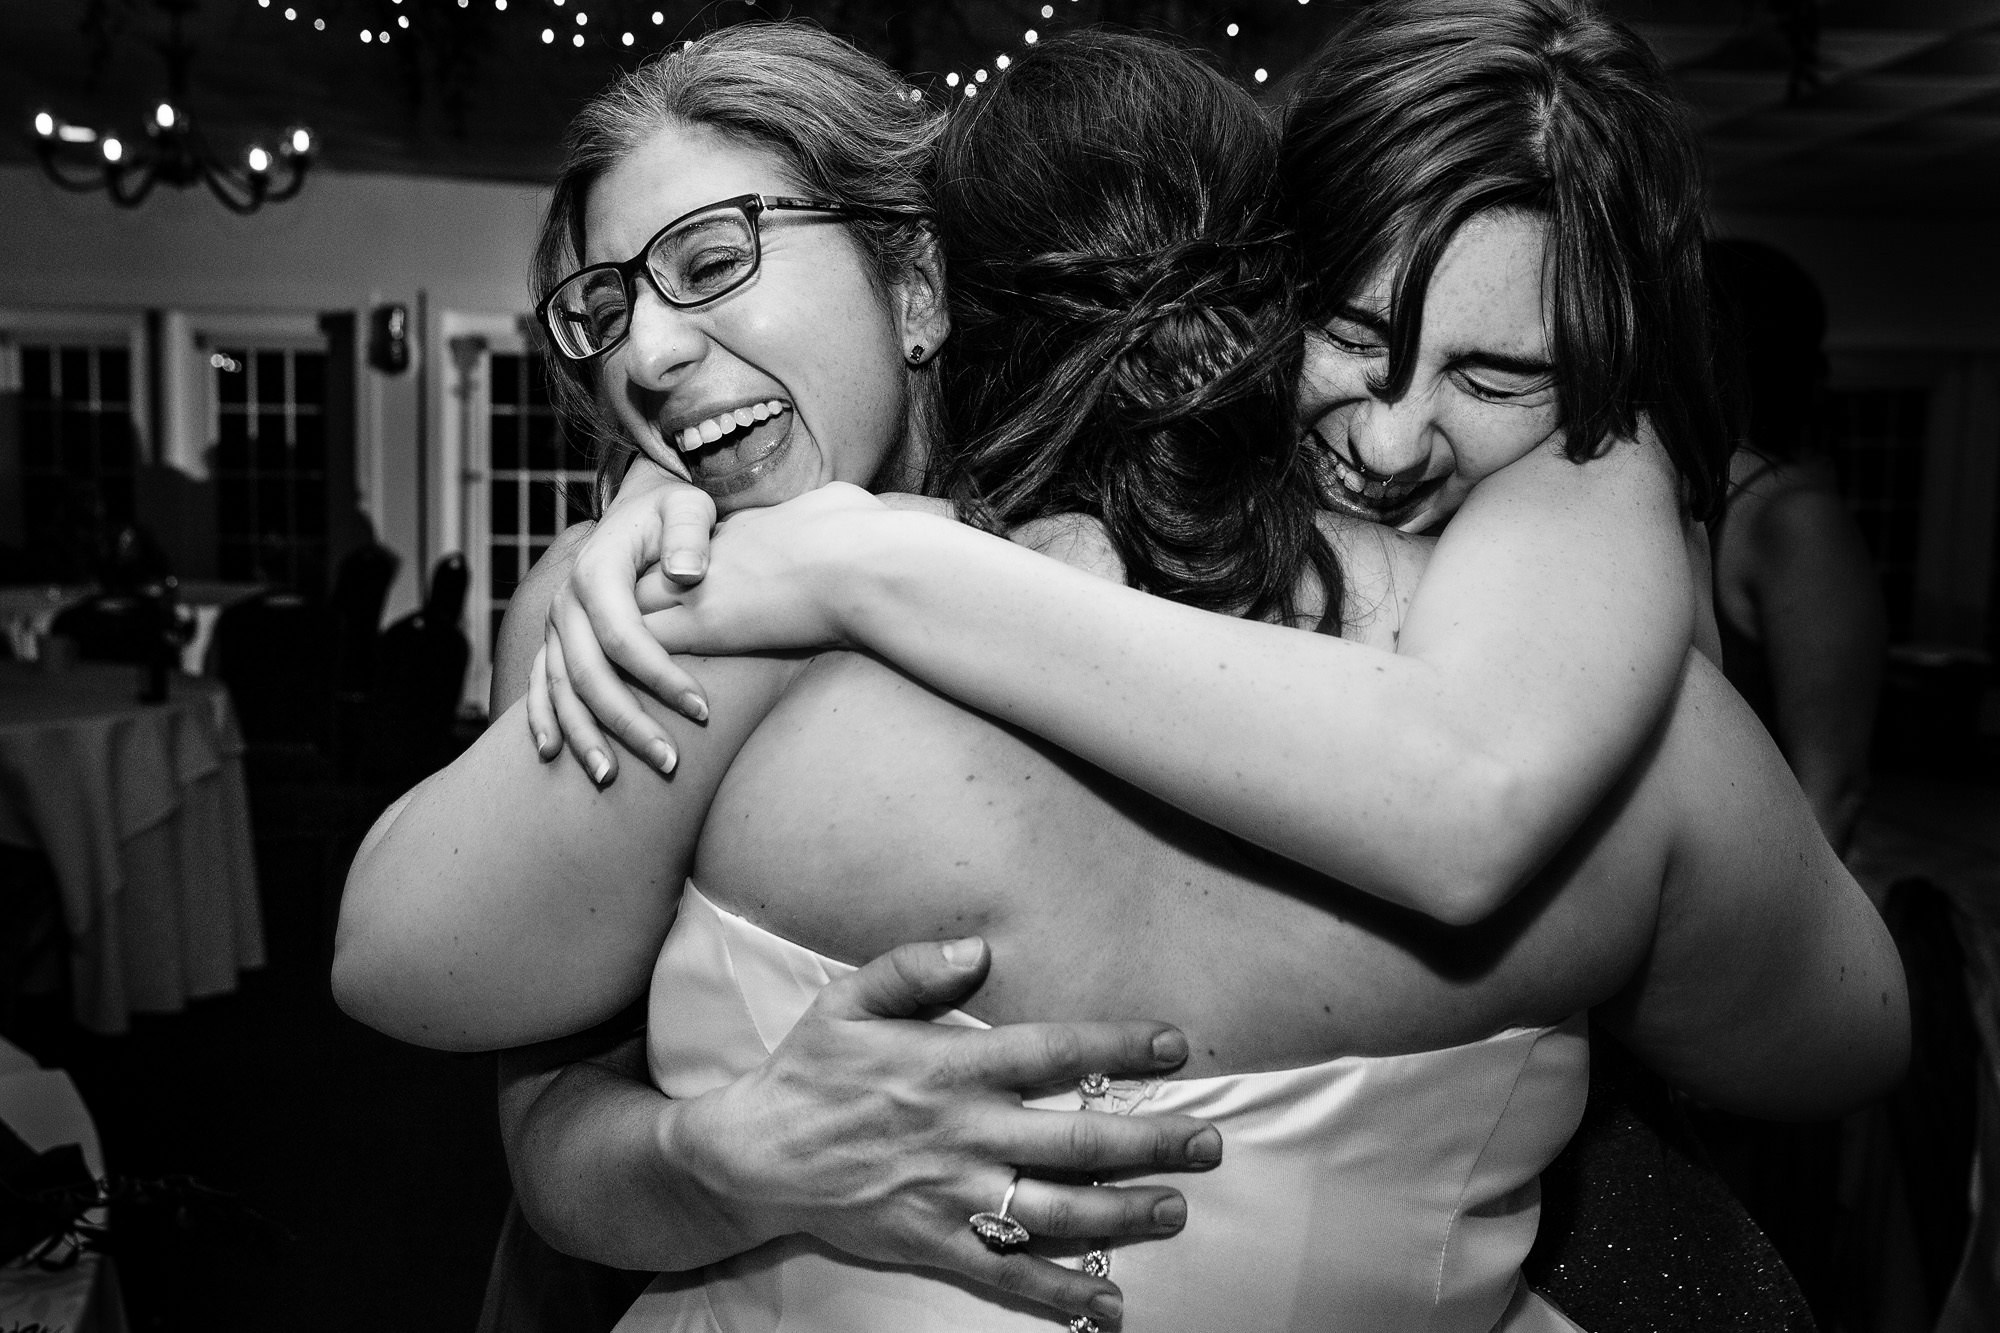 Two of the bride's best friends hug the bride at the end of her wedding reception in Maine